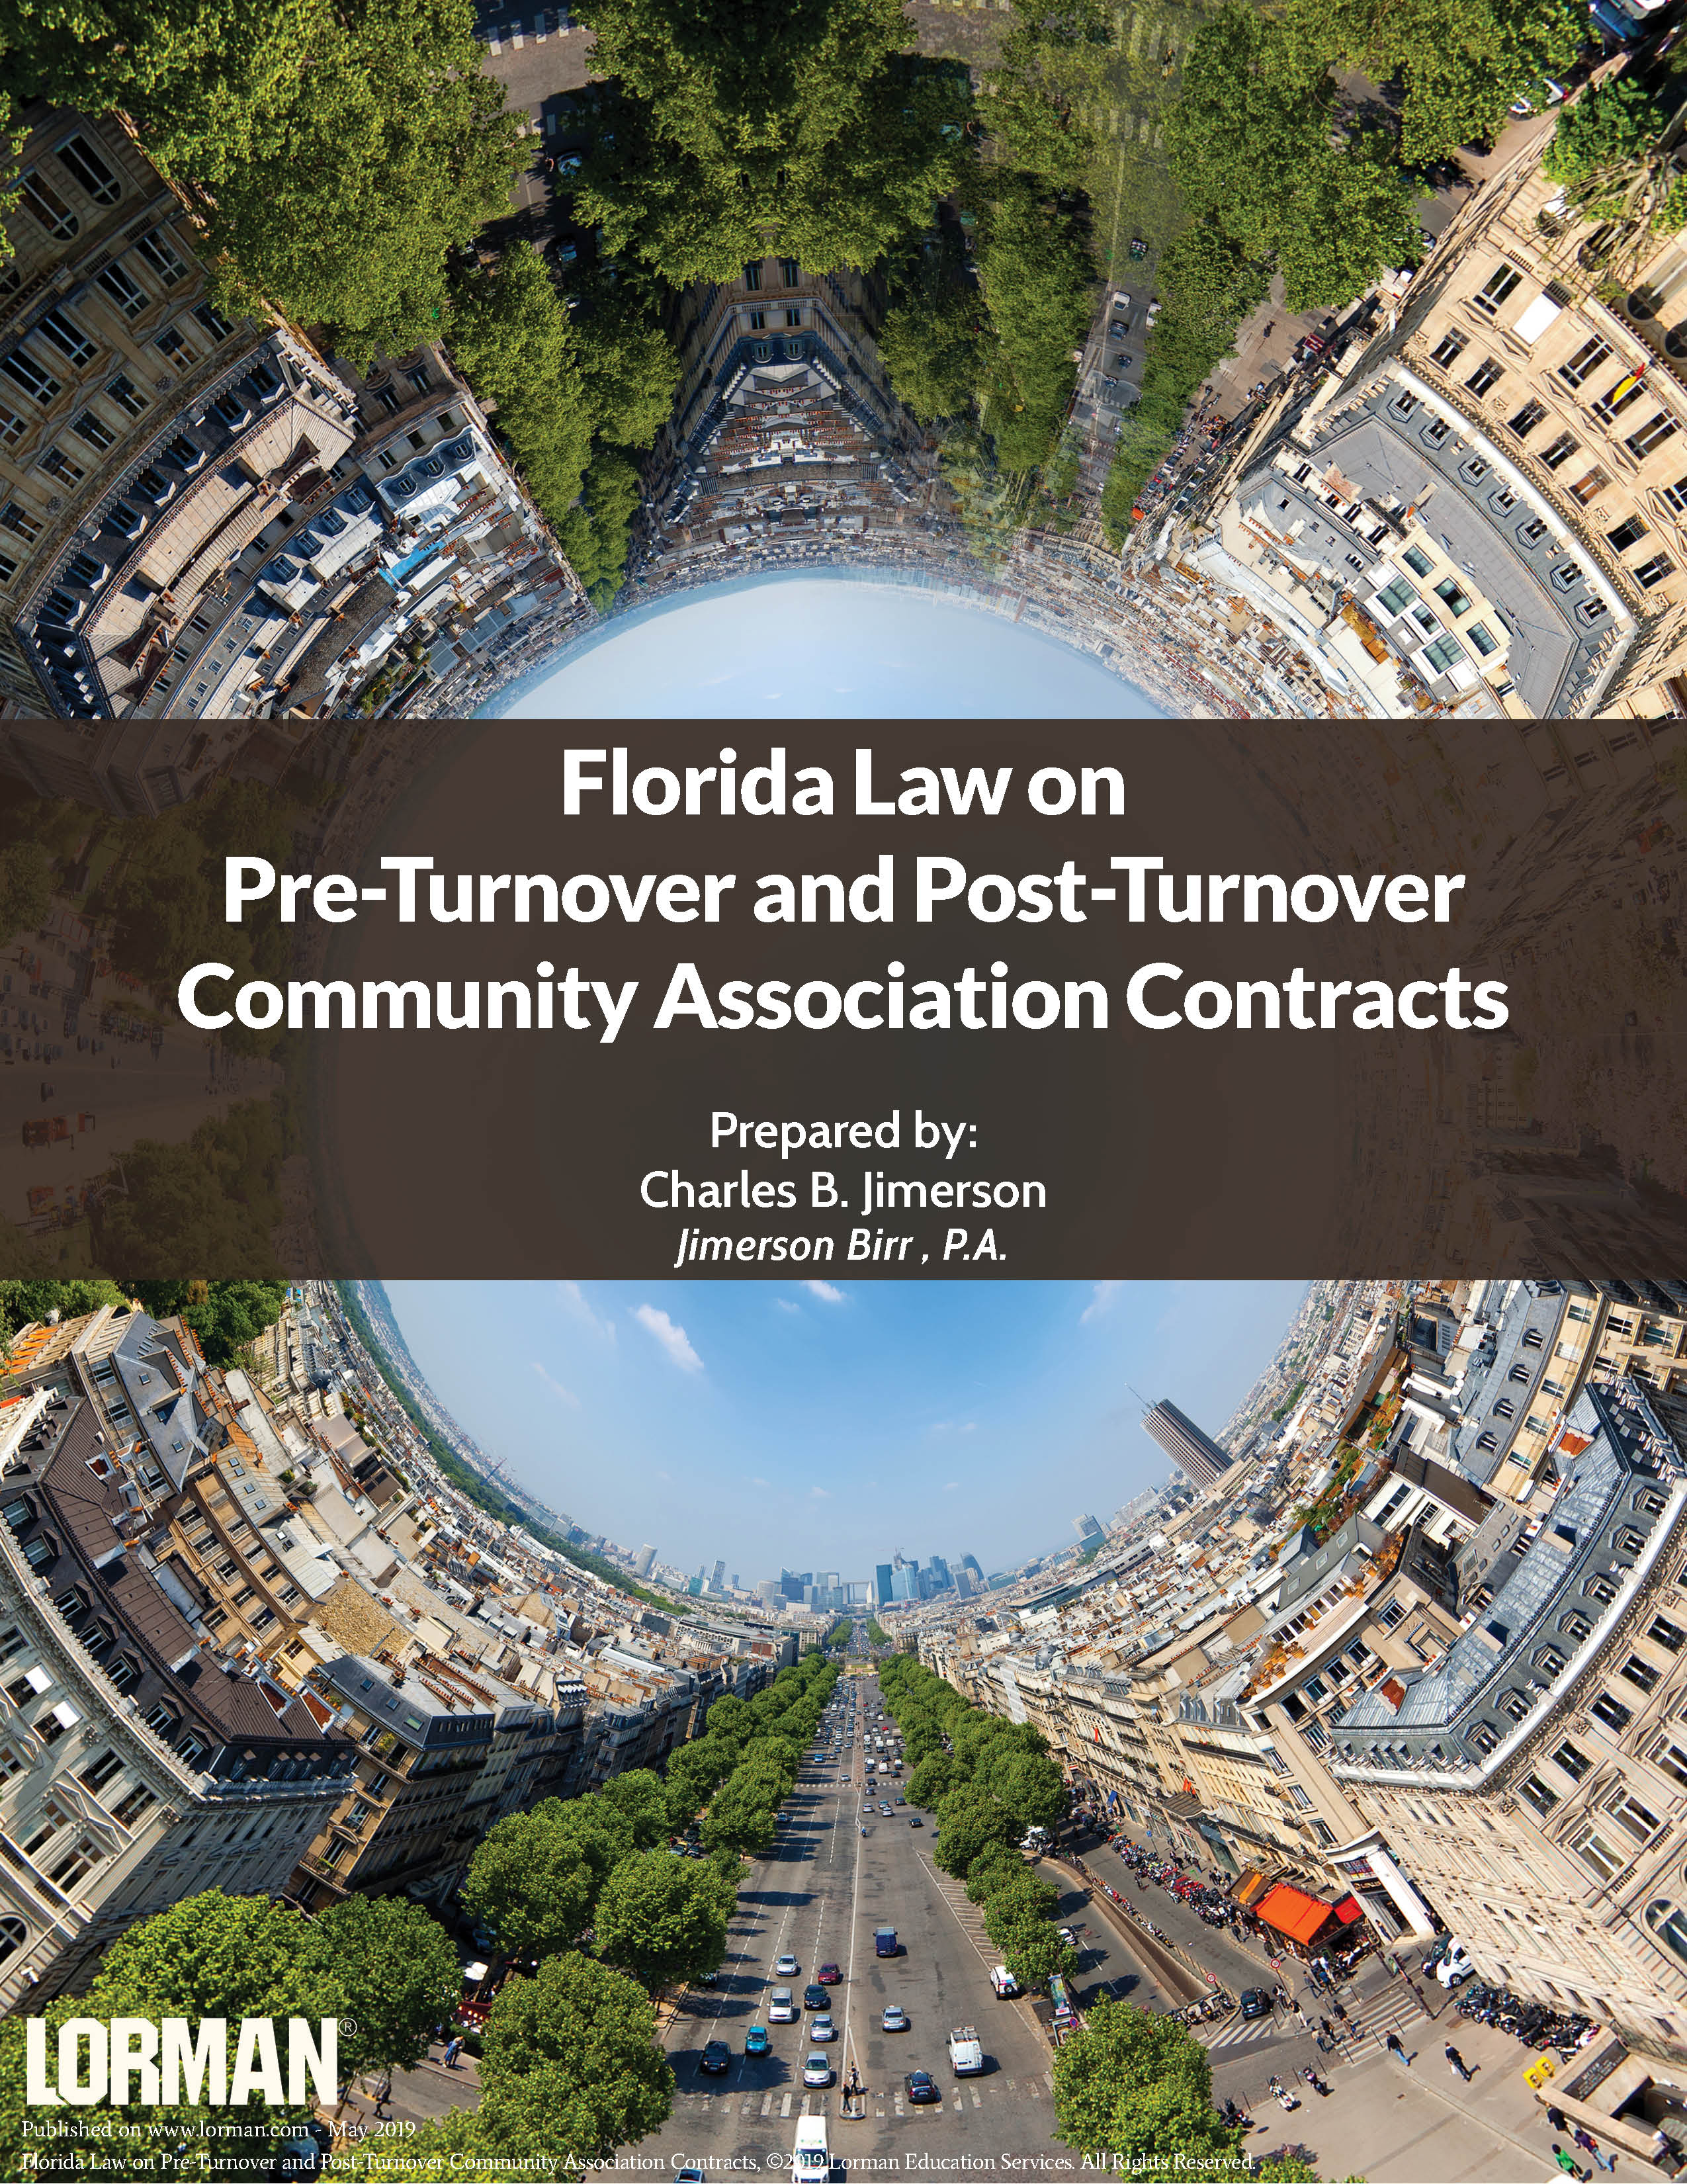 Florida Law on Pre-Turnover and Post-Turnover Community Association Contracts